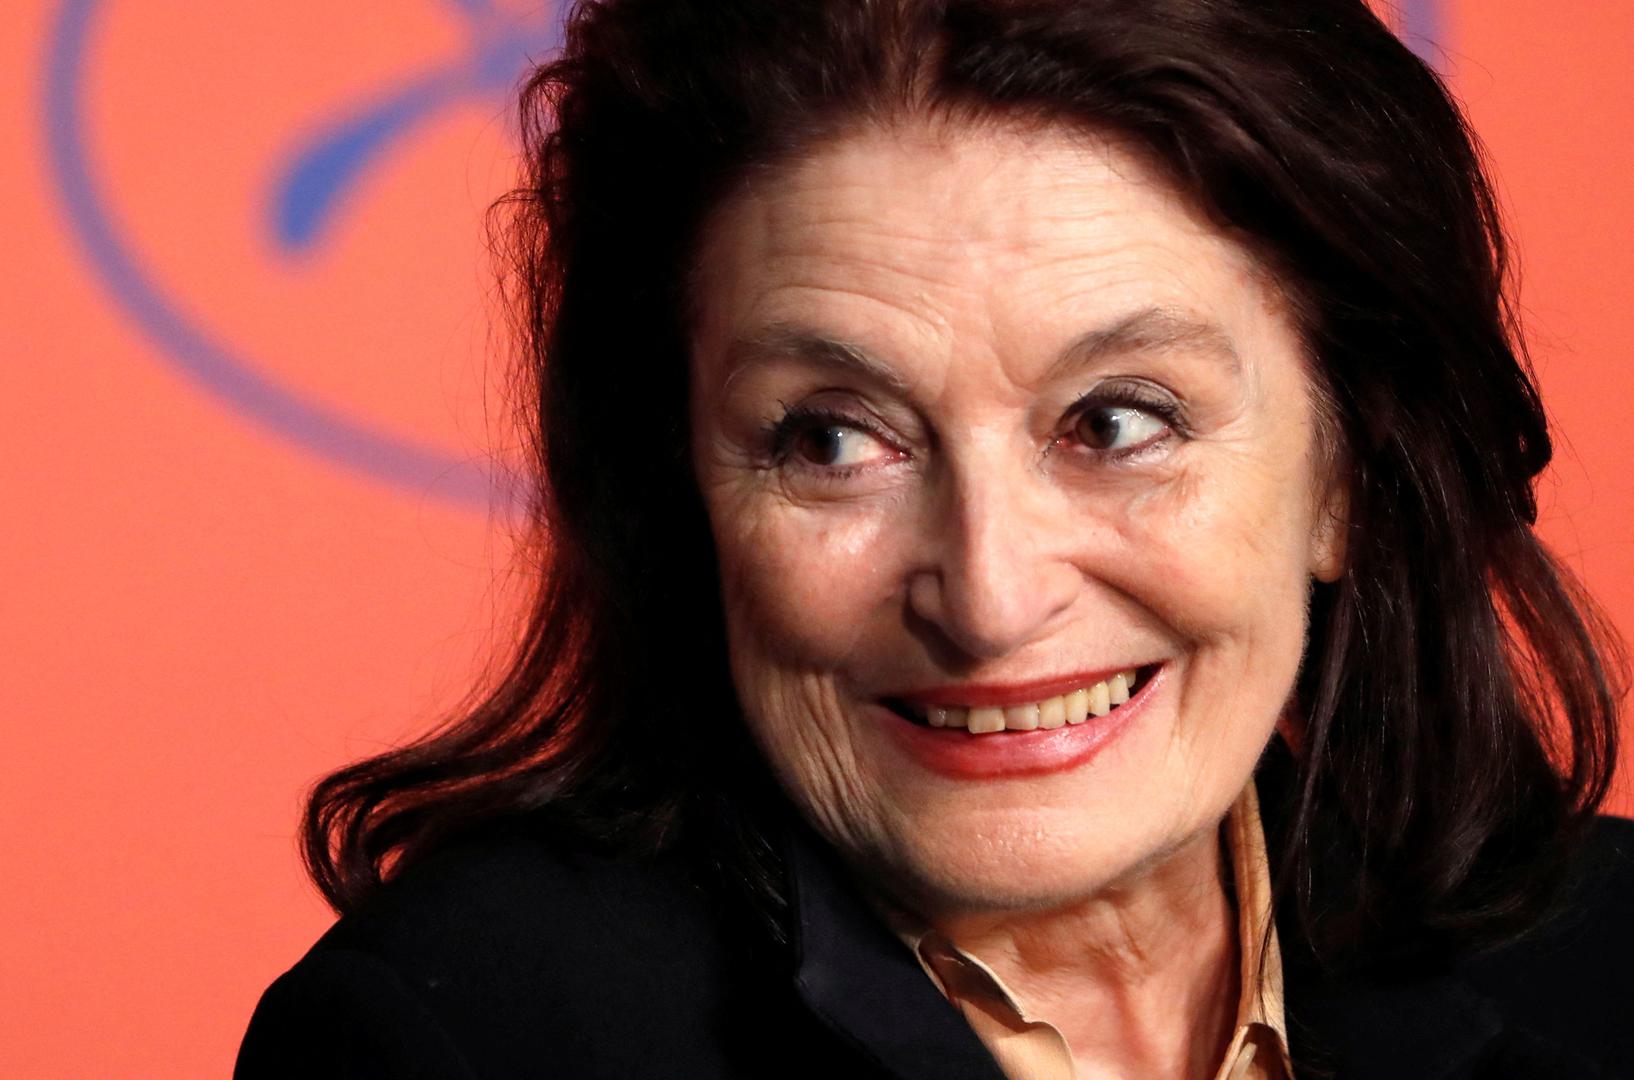 FILE PHOTO: 72nd Cannes Film Festival - News conference for the film "The Best Years of a Life" (Les plus belles annees d'une vie) Out of Competition - Cannes, France, May 19, 2019. Cast member Anouk Aimee reacts. REUTERS/Eric Gaillard/File Photo Photo: ERIC GAILLARD/REUTERS